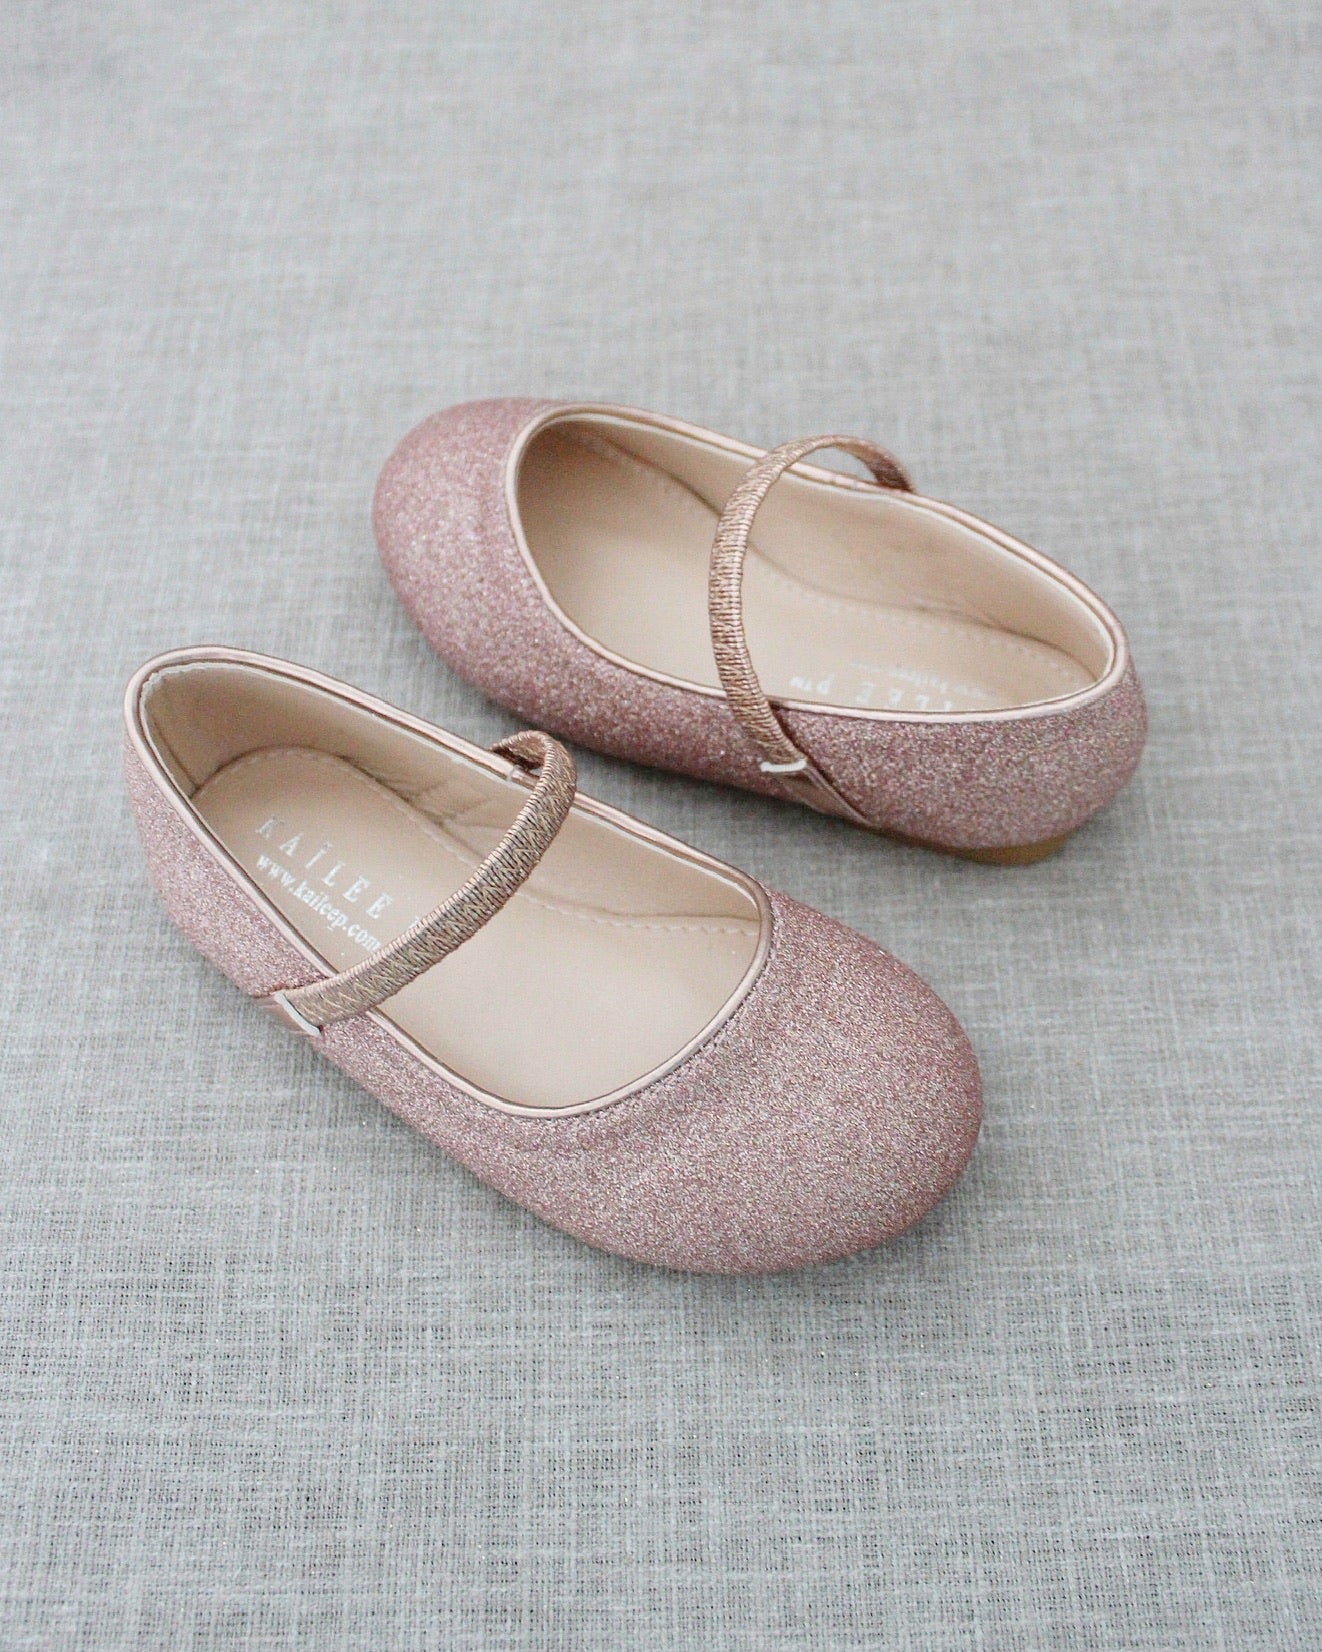 Girls Rose Gold Shoes, Ballet flats, Mary Jane, Heels, Birthday Shoes ...